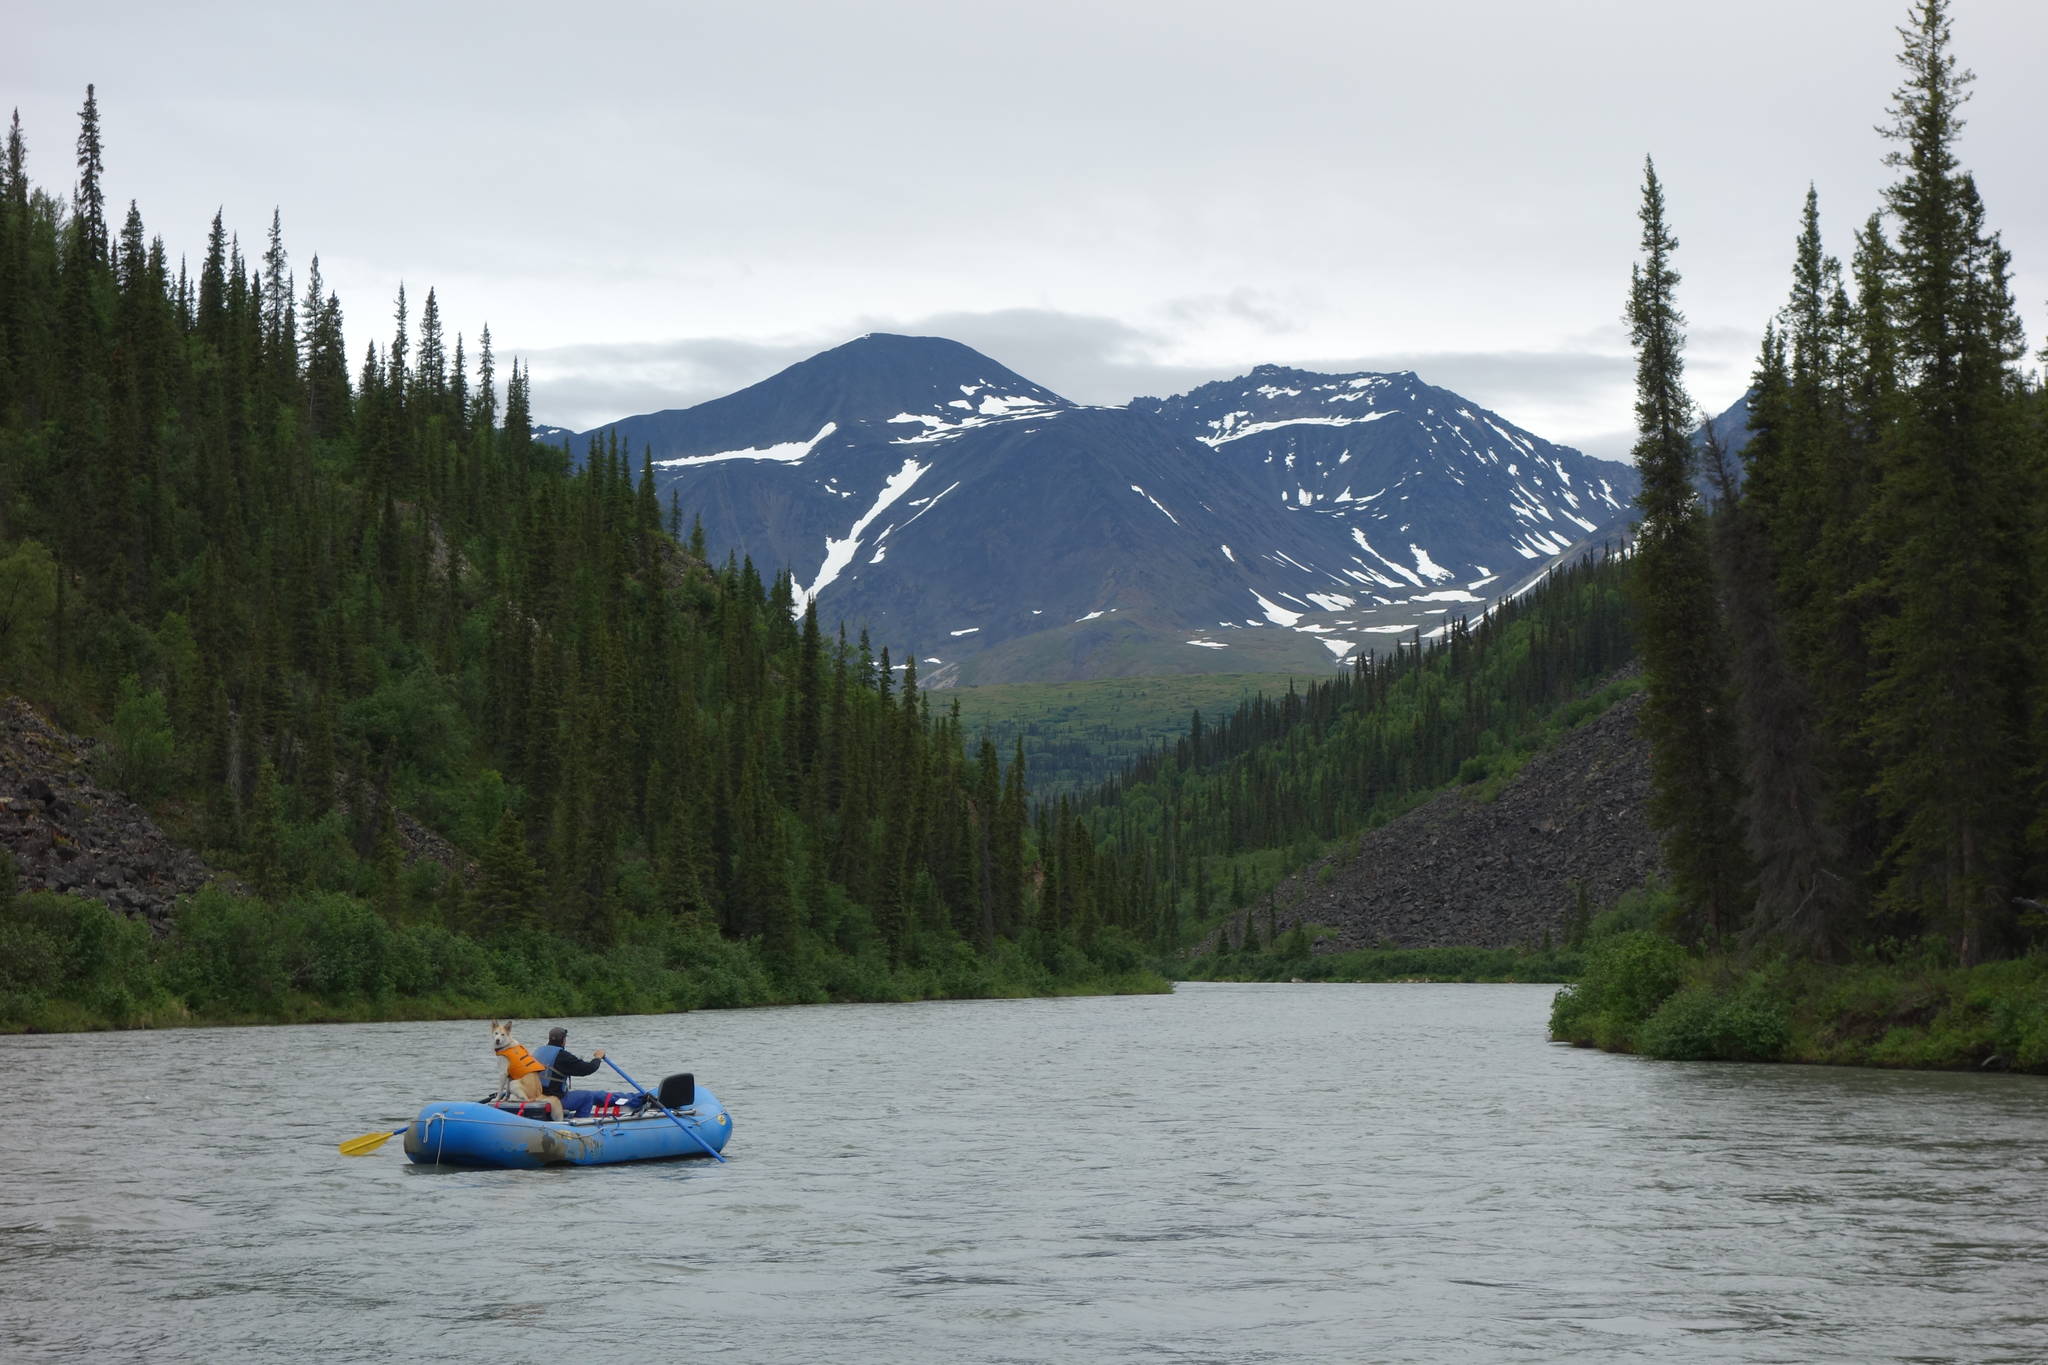 The Nenana River originates near here, north of the Alaska Range, and flows through the mountains south of the range. (Courtesy Photo | Ned Rozell)